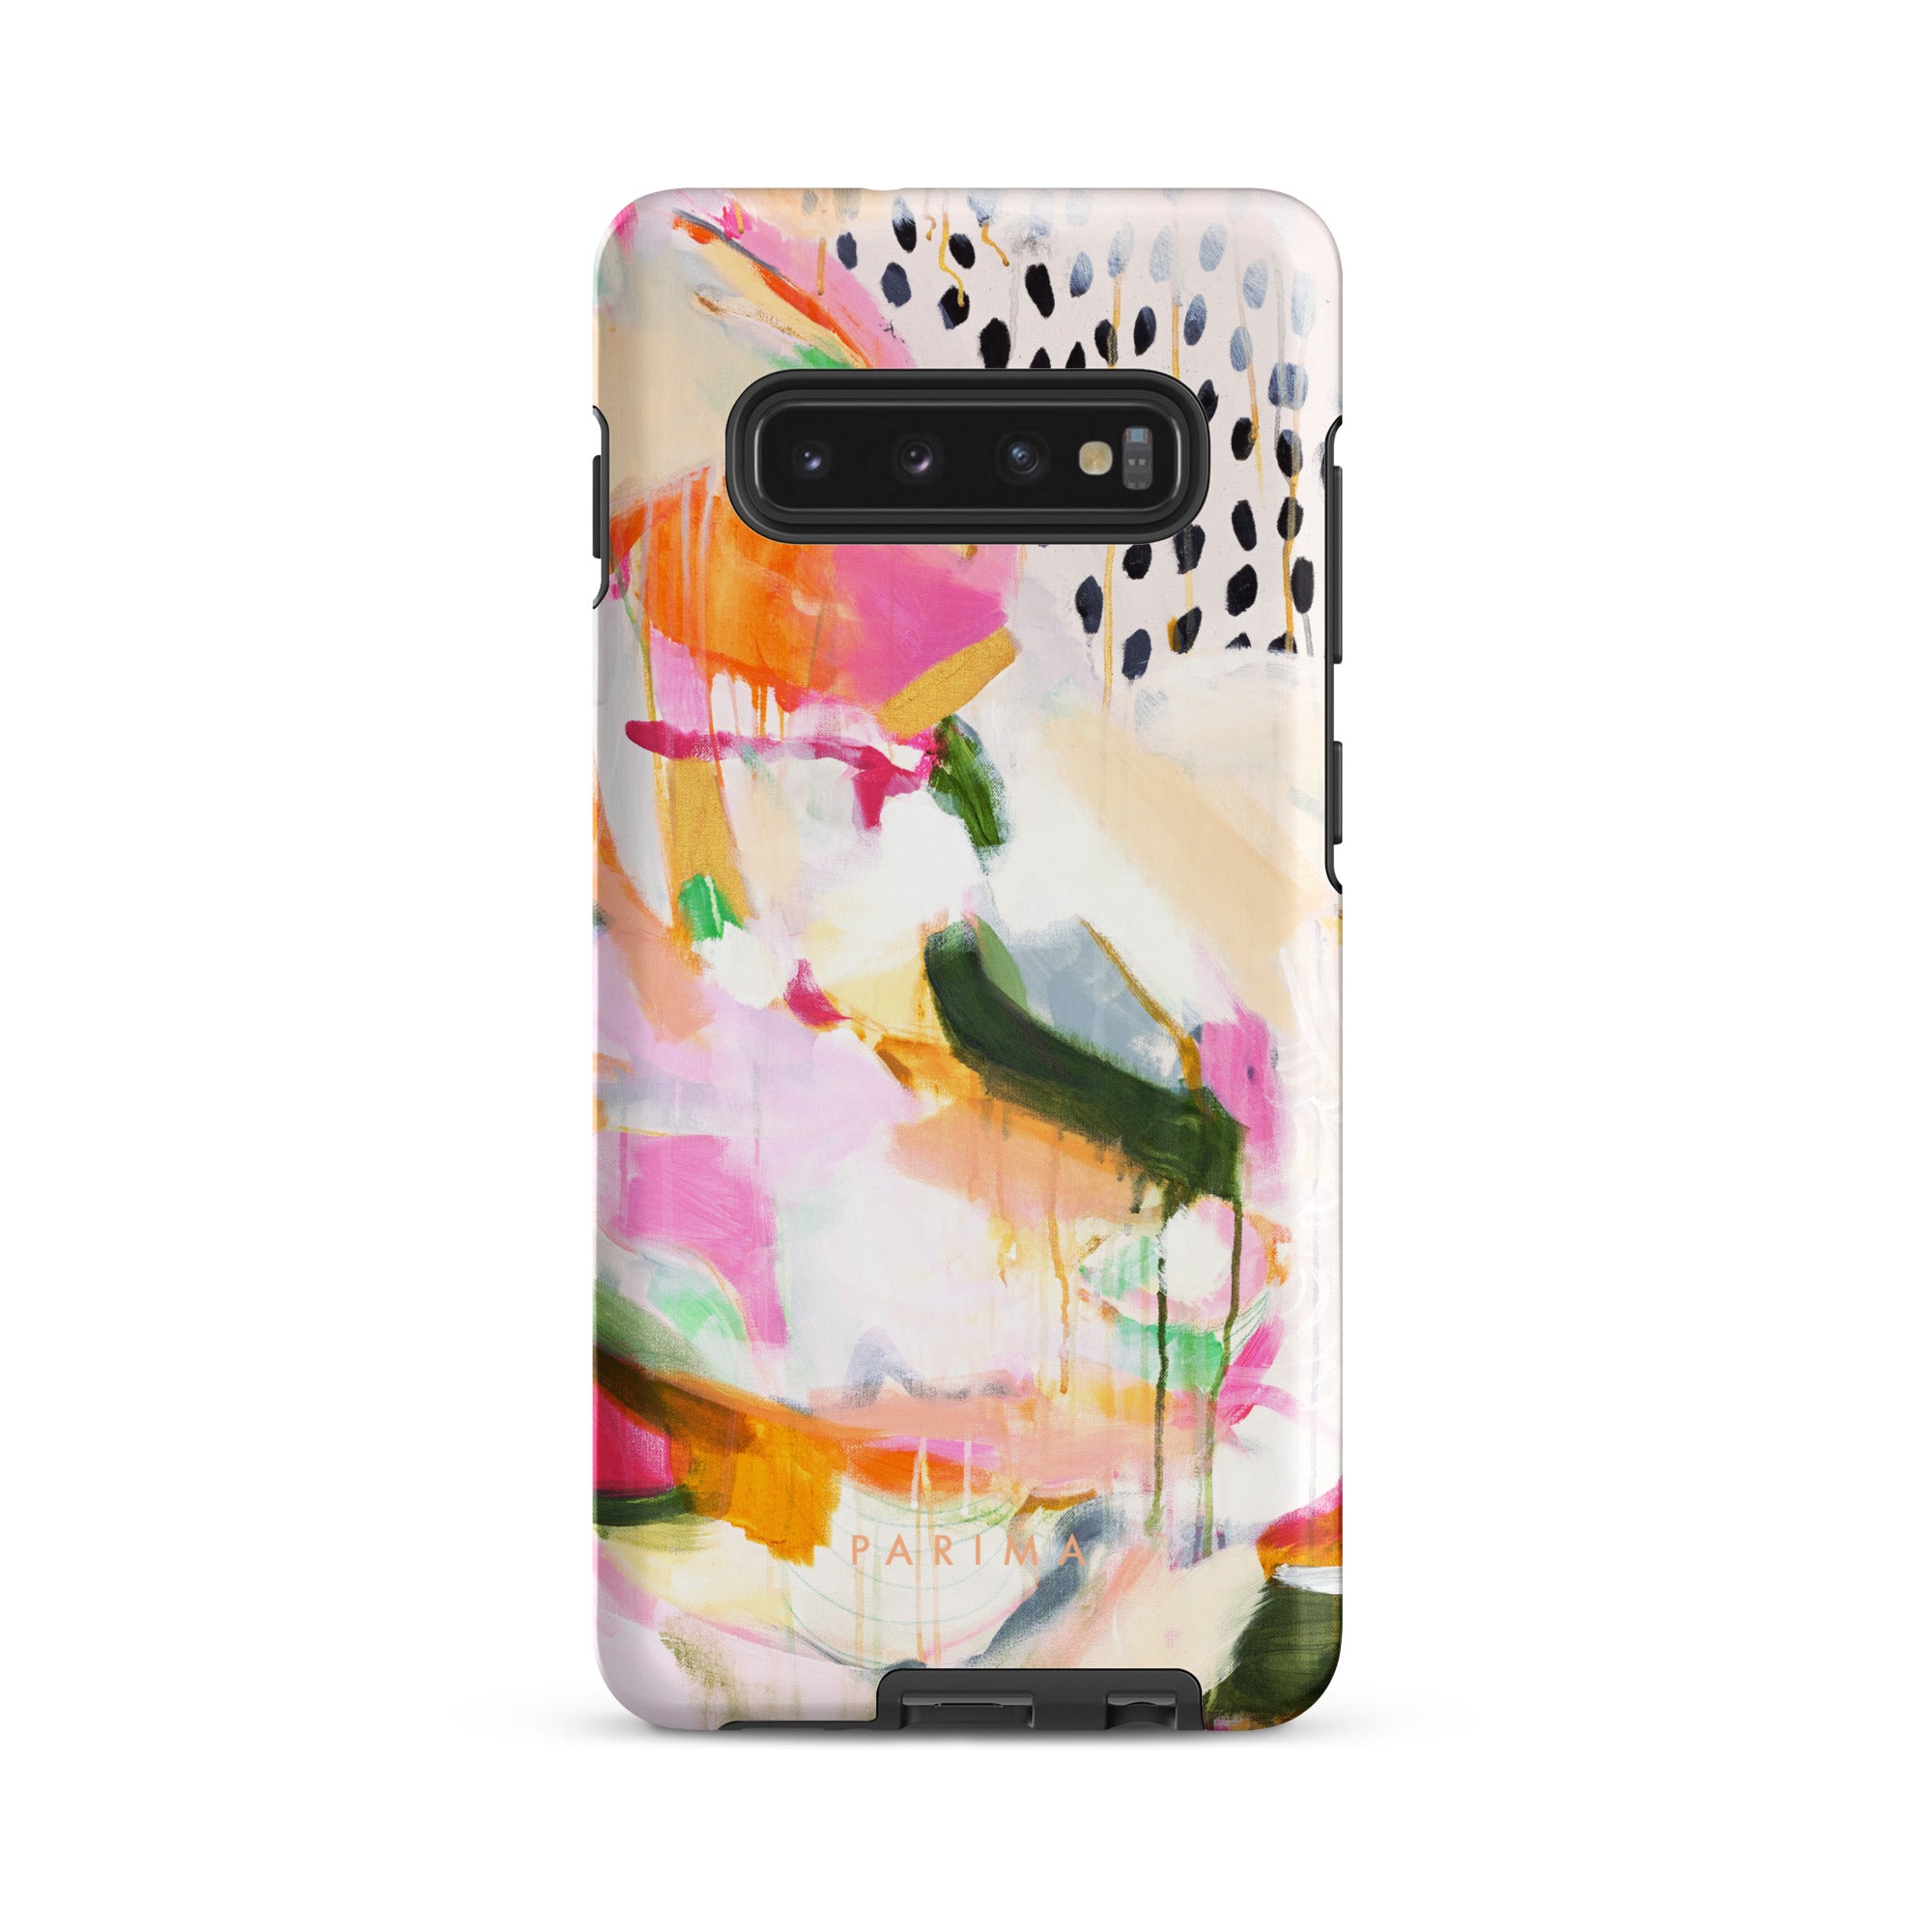 Adira, pink and green abstract art on Samsung Galaxy S10 Plus tough case by Parima Studio